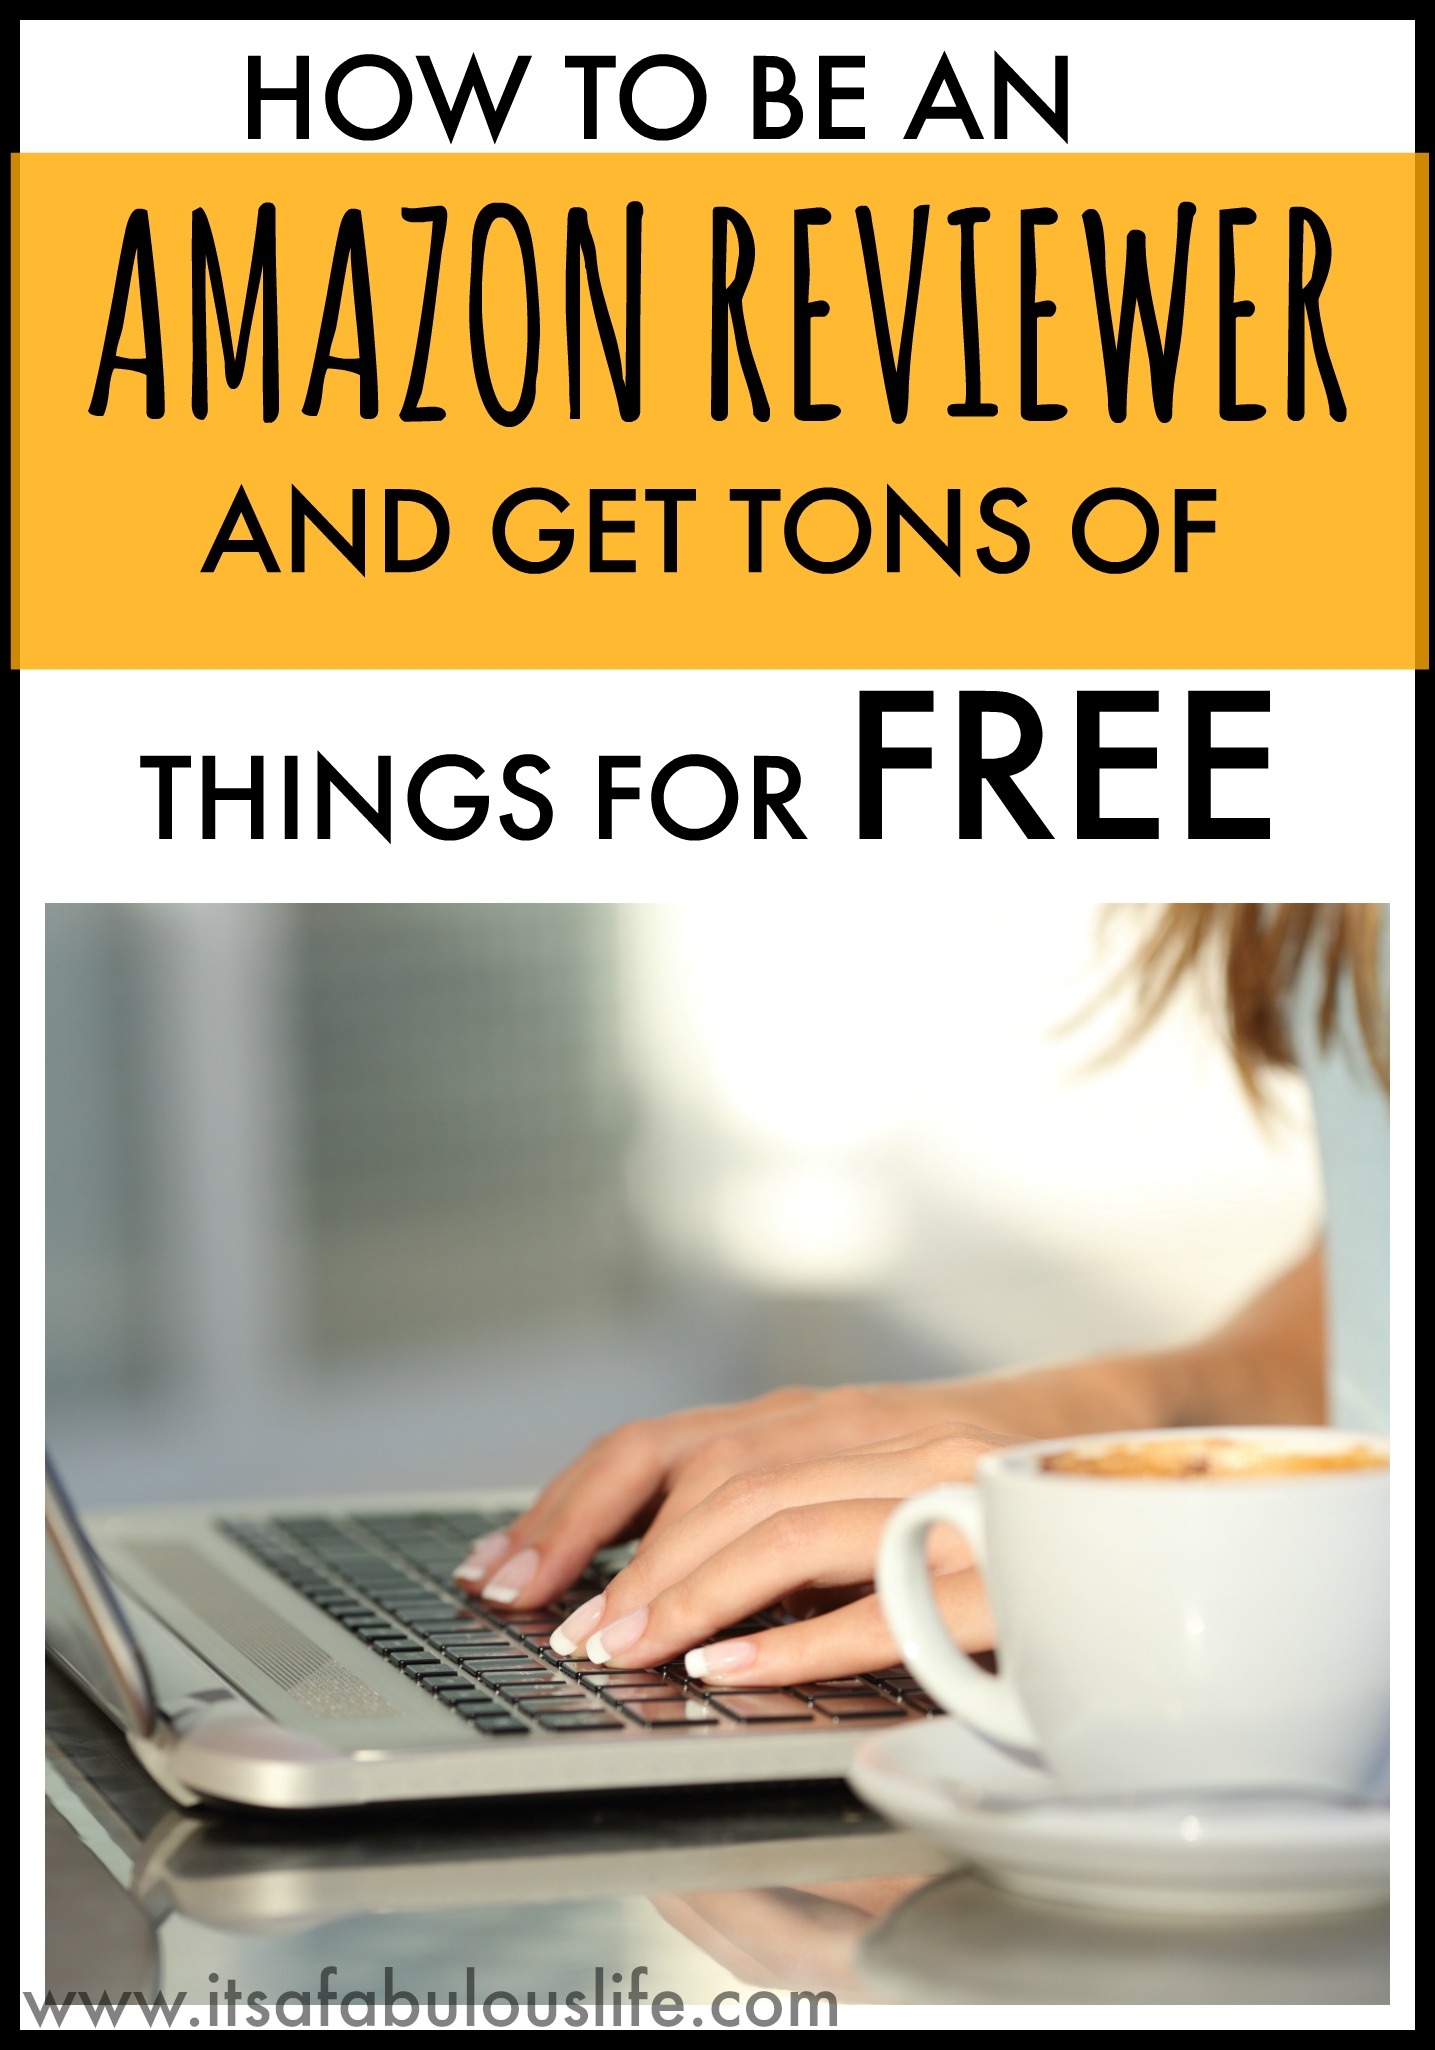 How to be an Amazon Reviewer